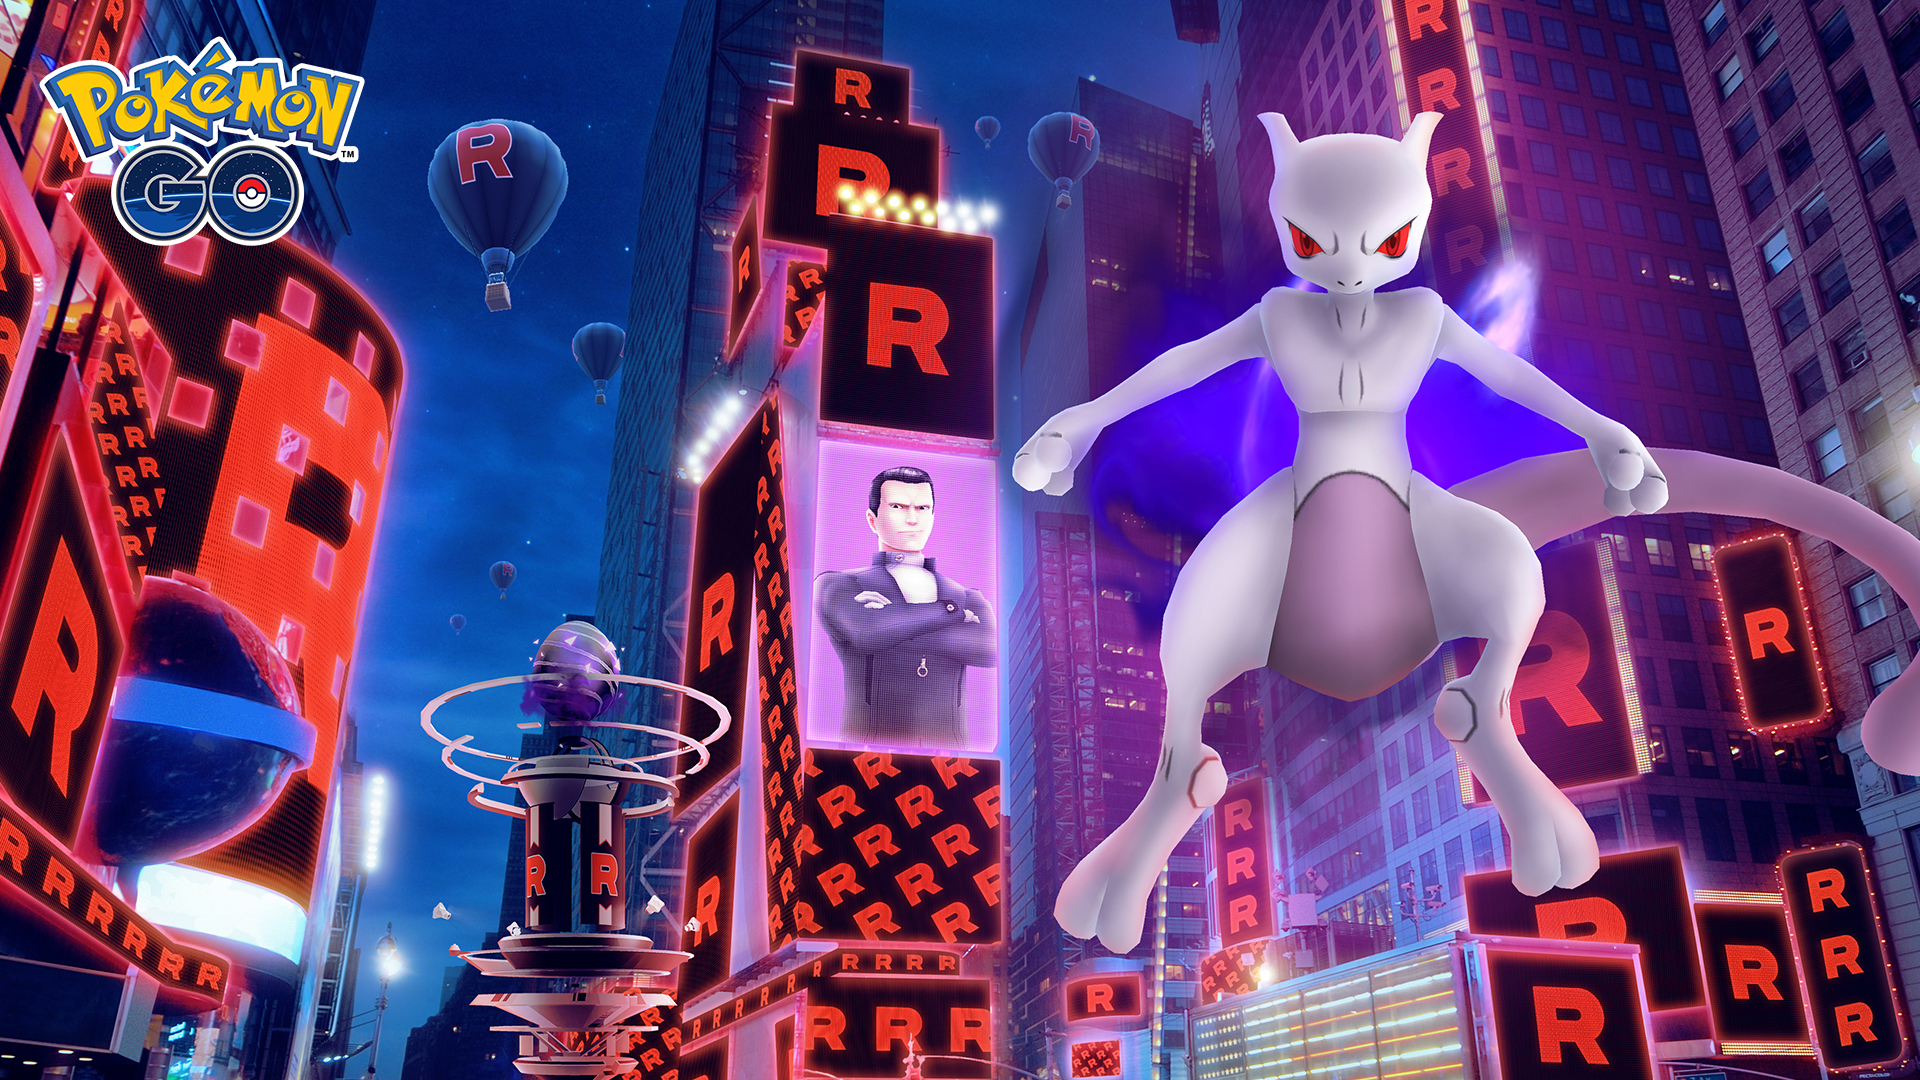 Armored Mewtwo Is Coming To 'Pokemon GO' In New Raid Battles Soon